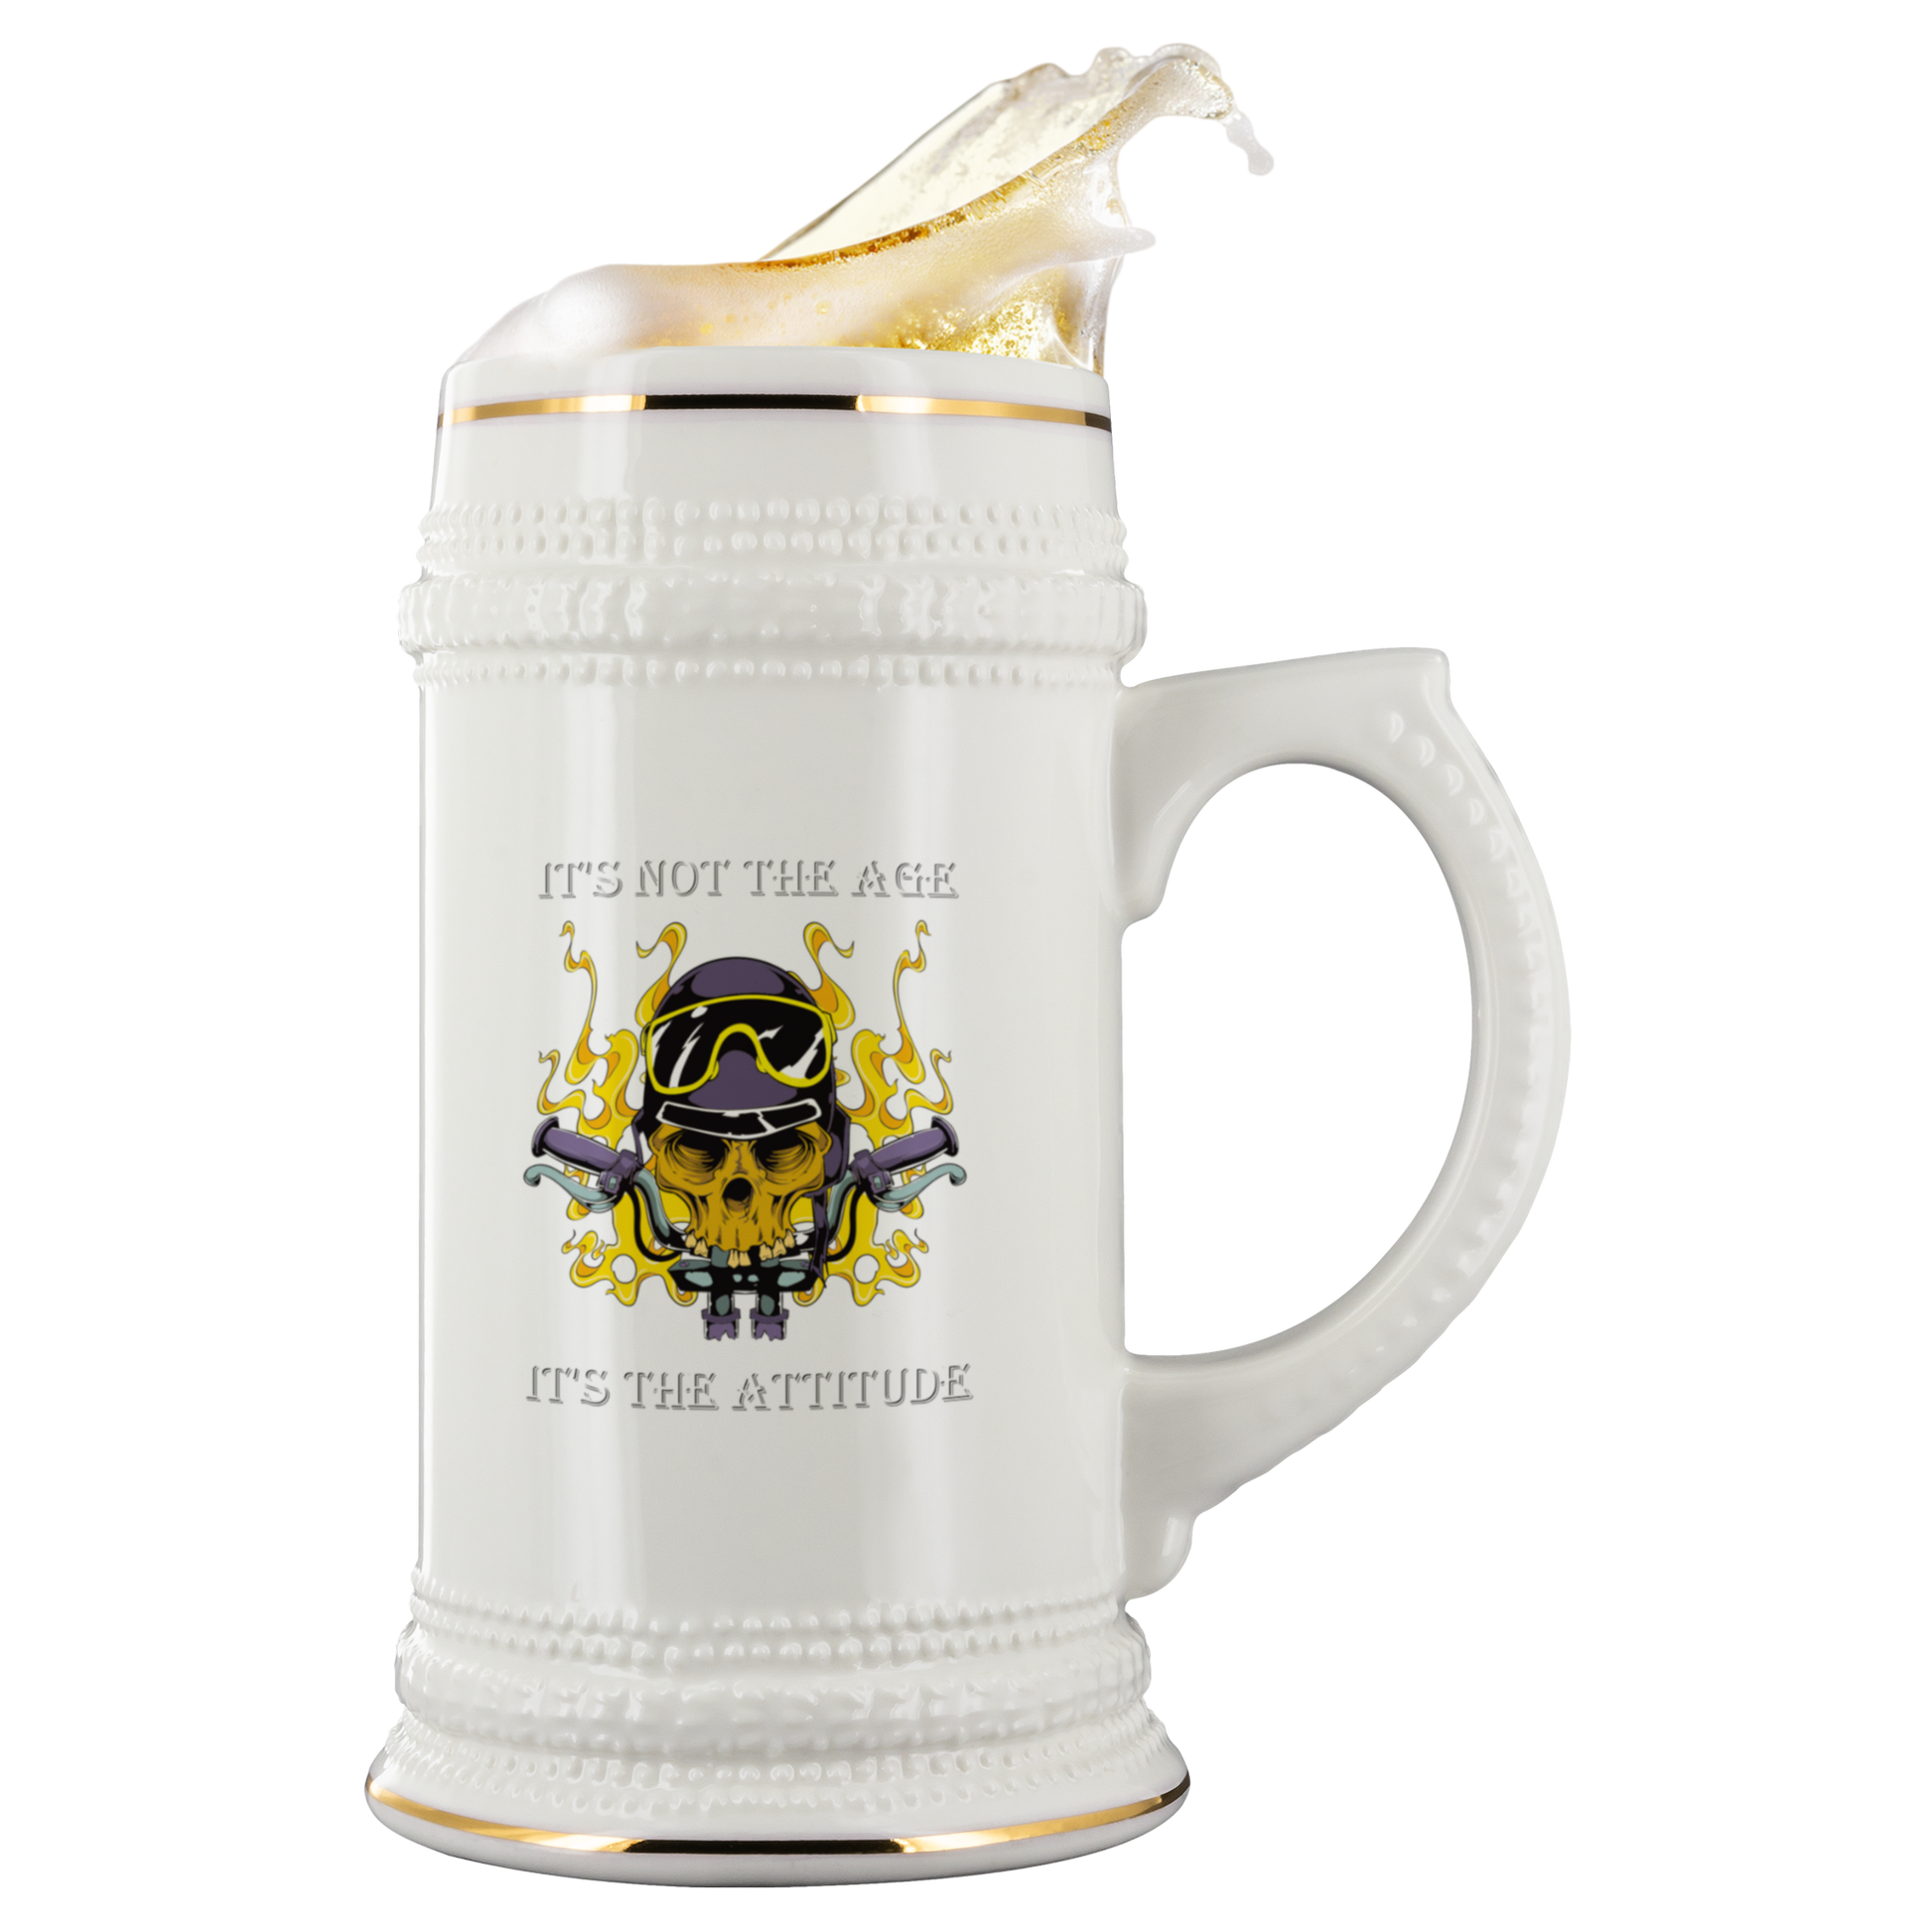 It's The Attitude - Beer Stein - Classically Styled